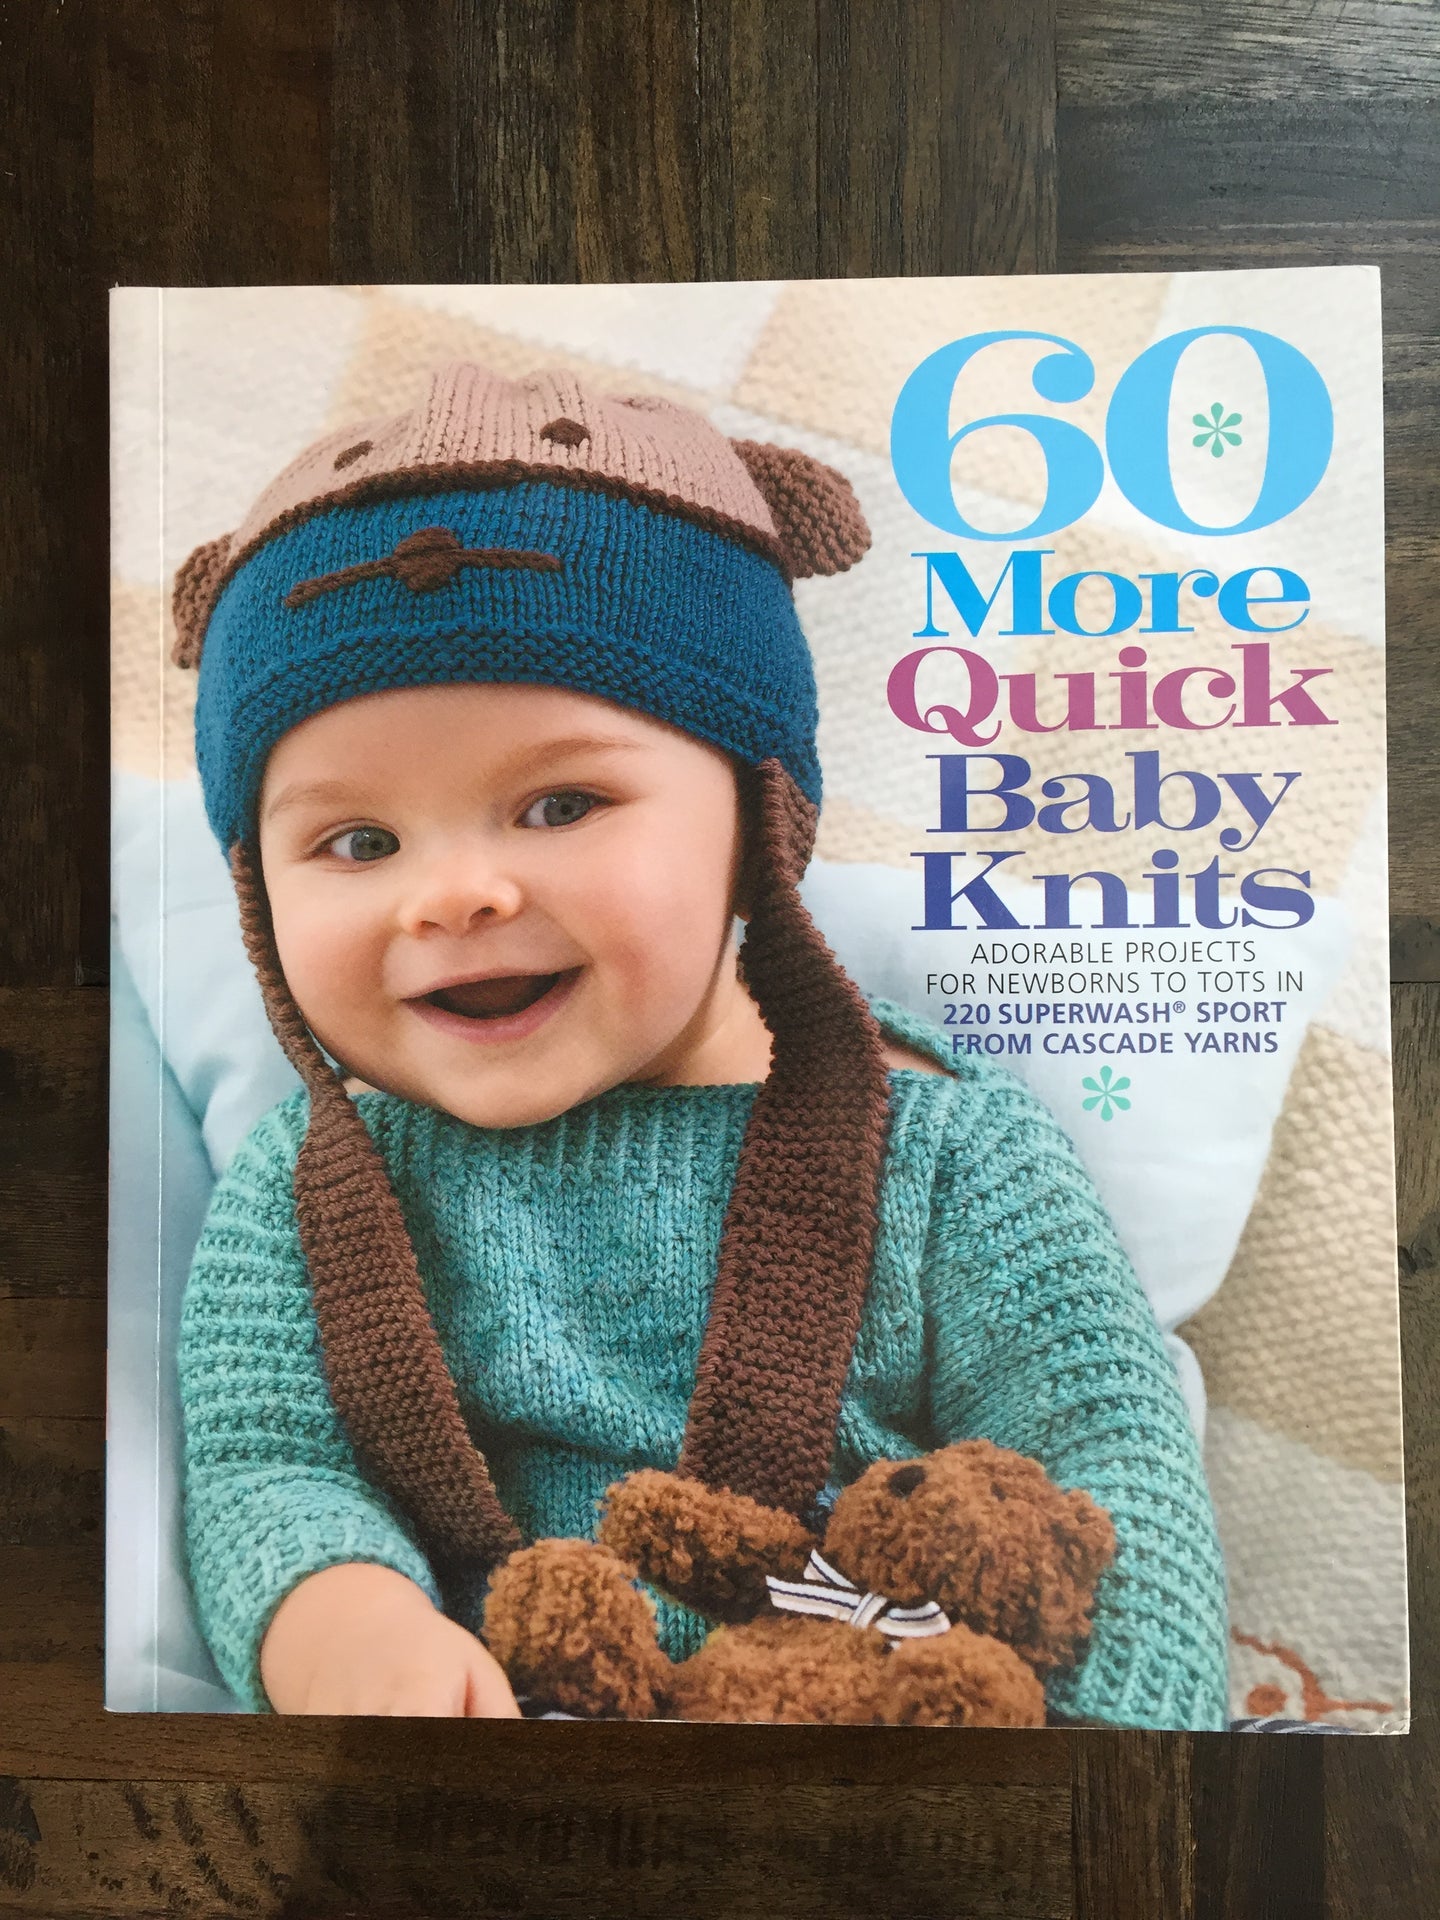 60 More Quick Baby Knits: Adorable Projects For Newborns to Tots